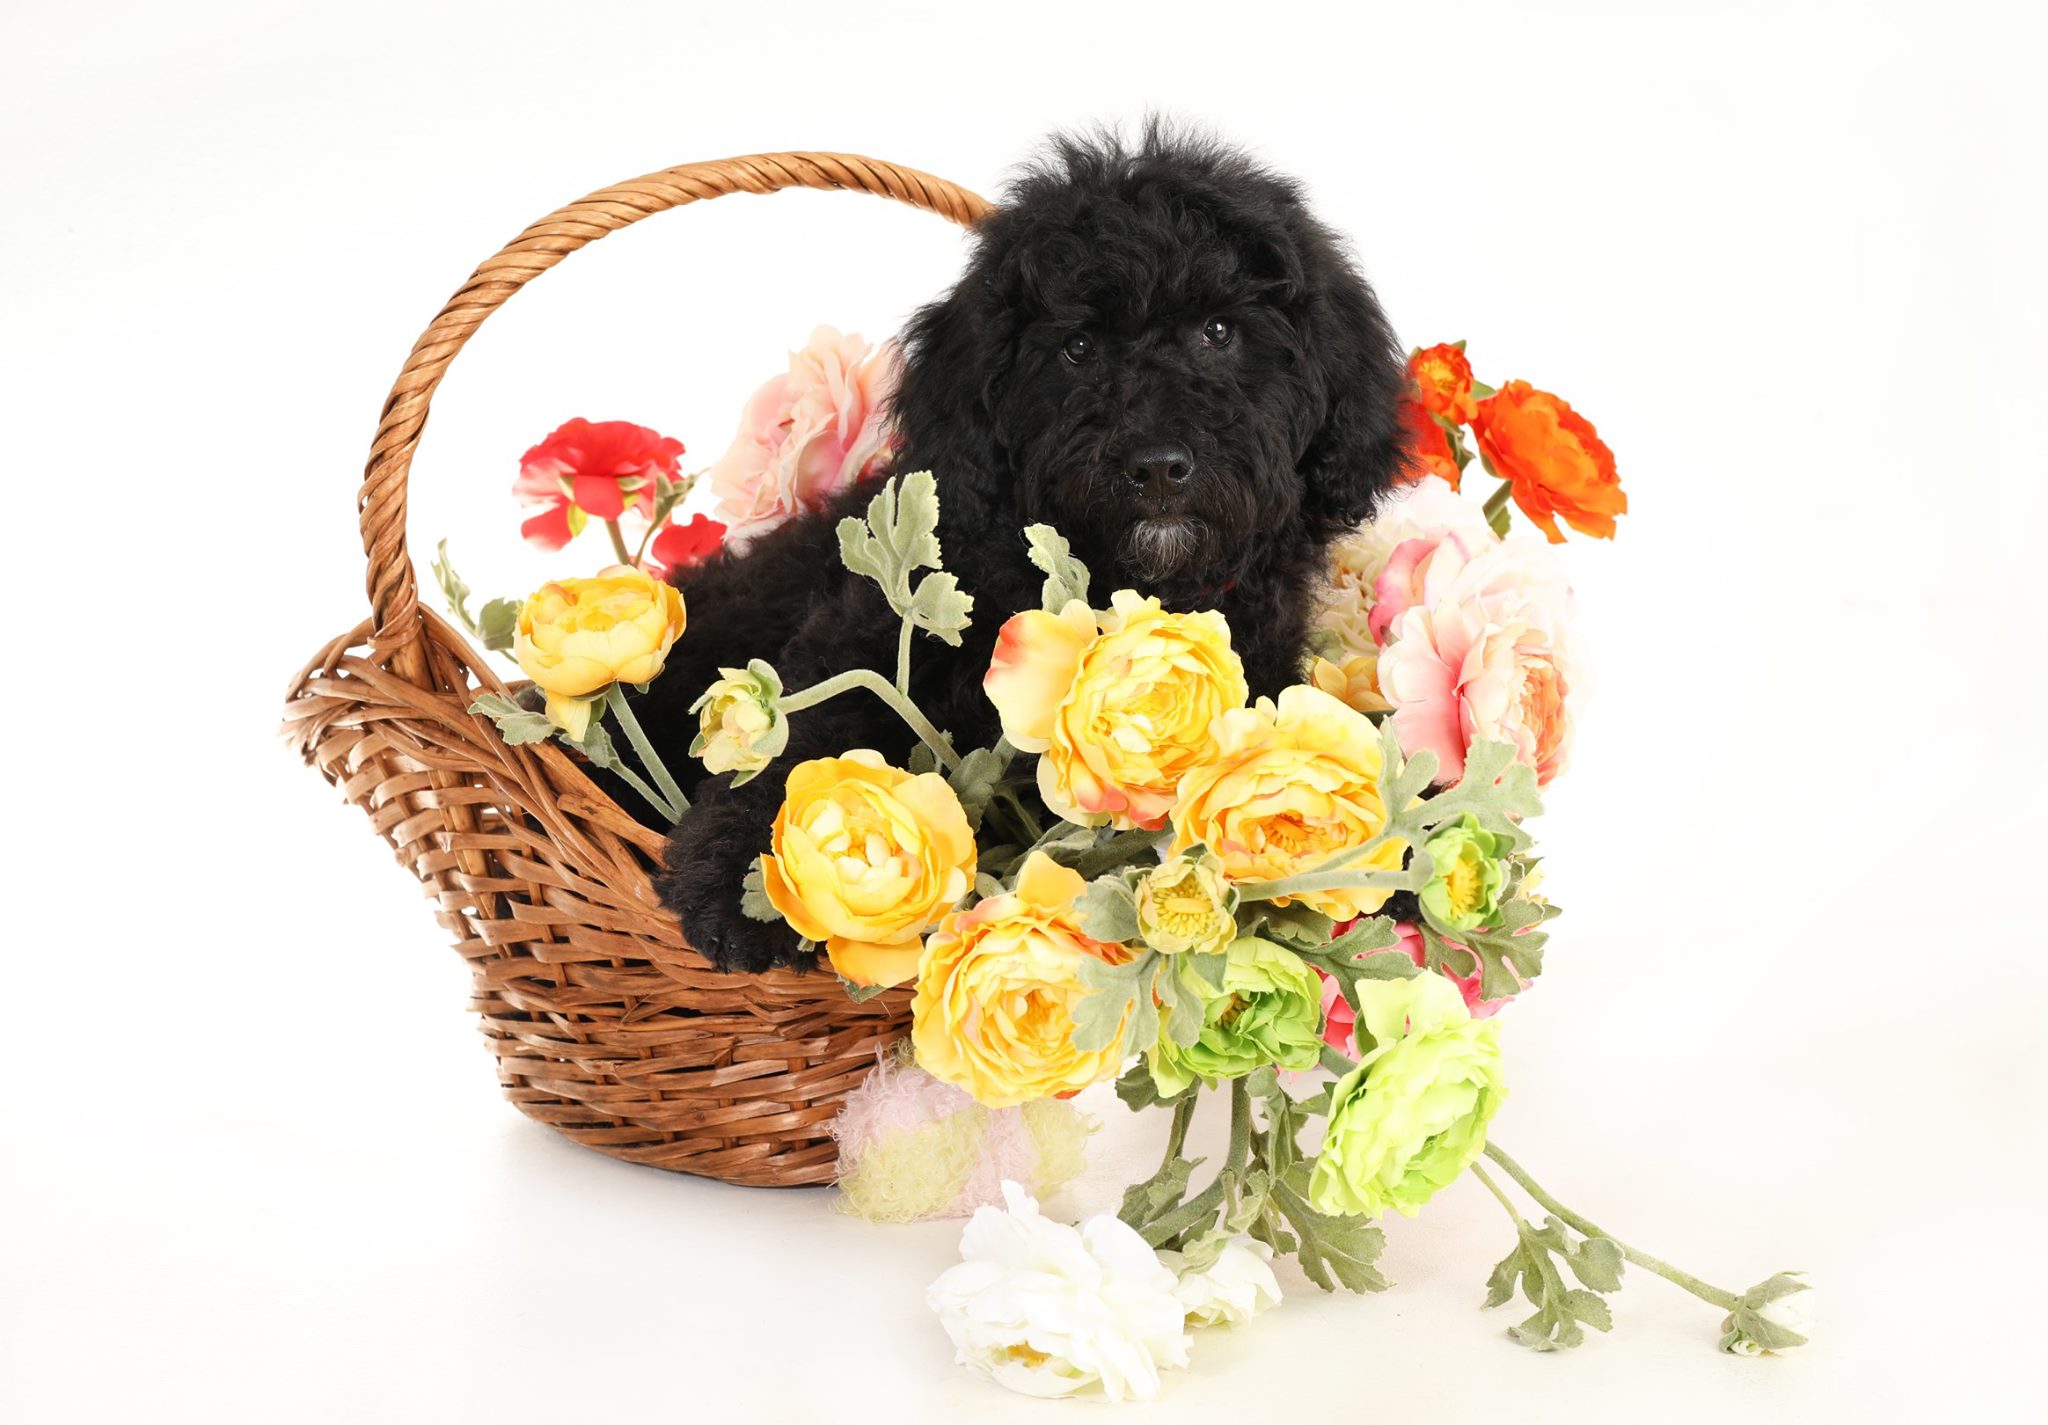 A black golden doodle in a basket of flowers. They are allergy friendly and hypoallergenic.